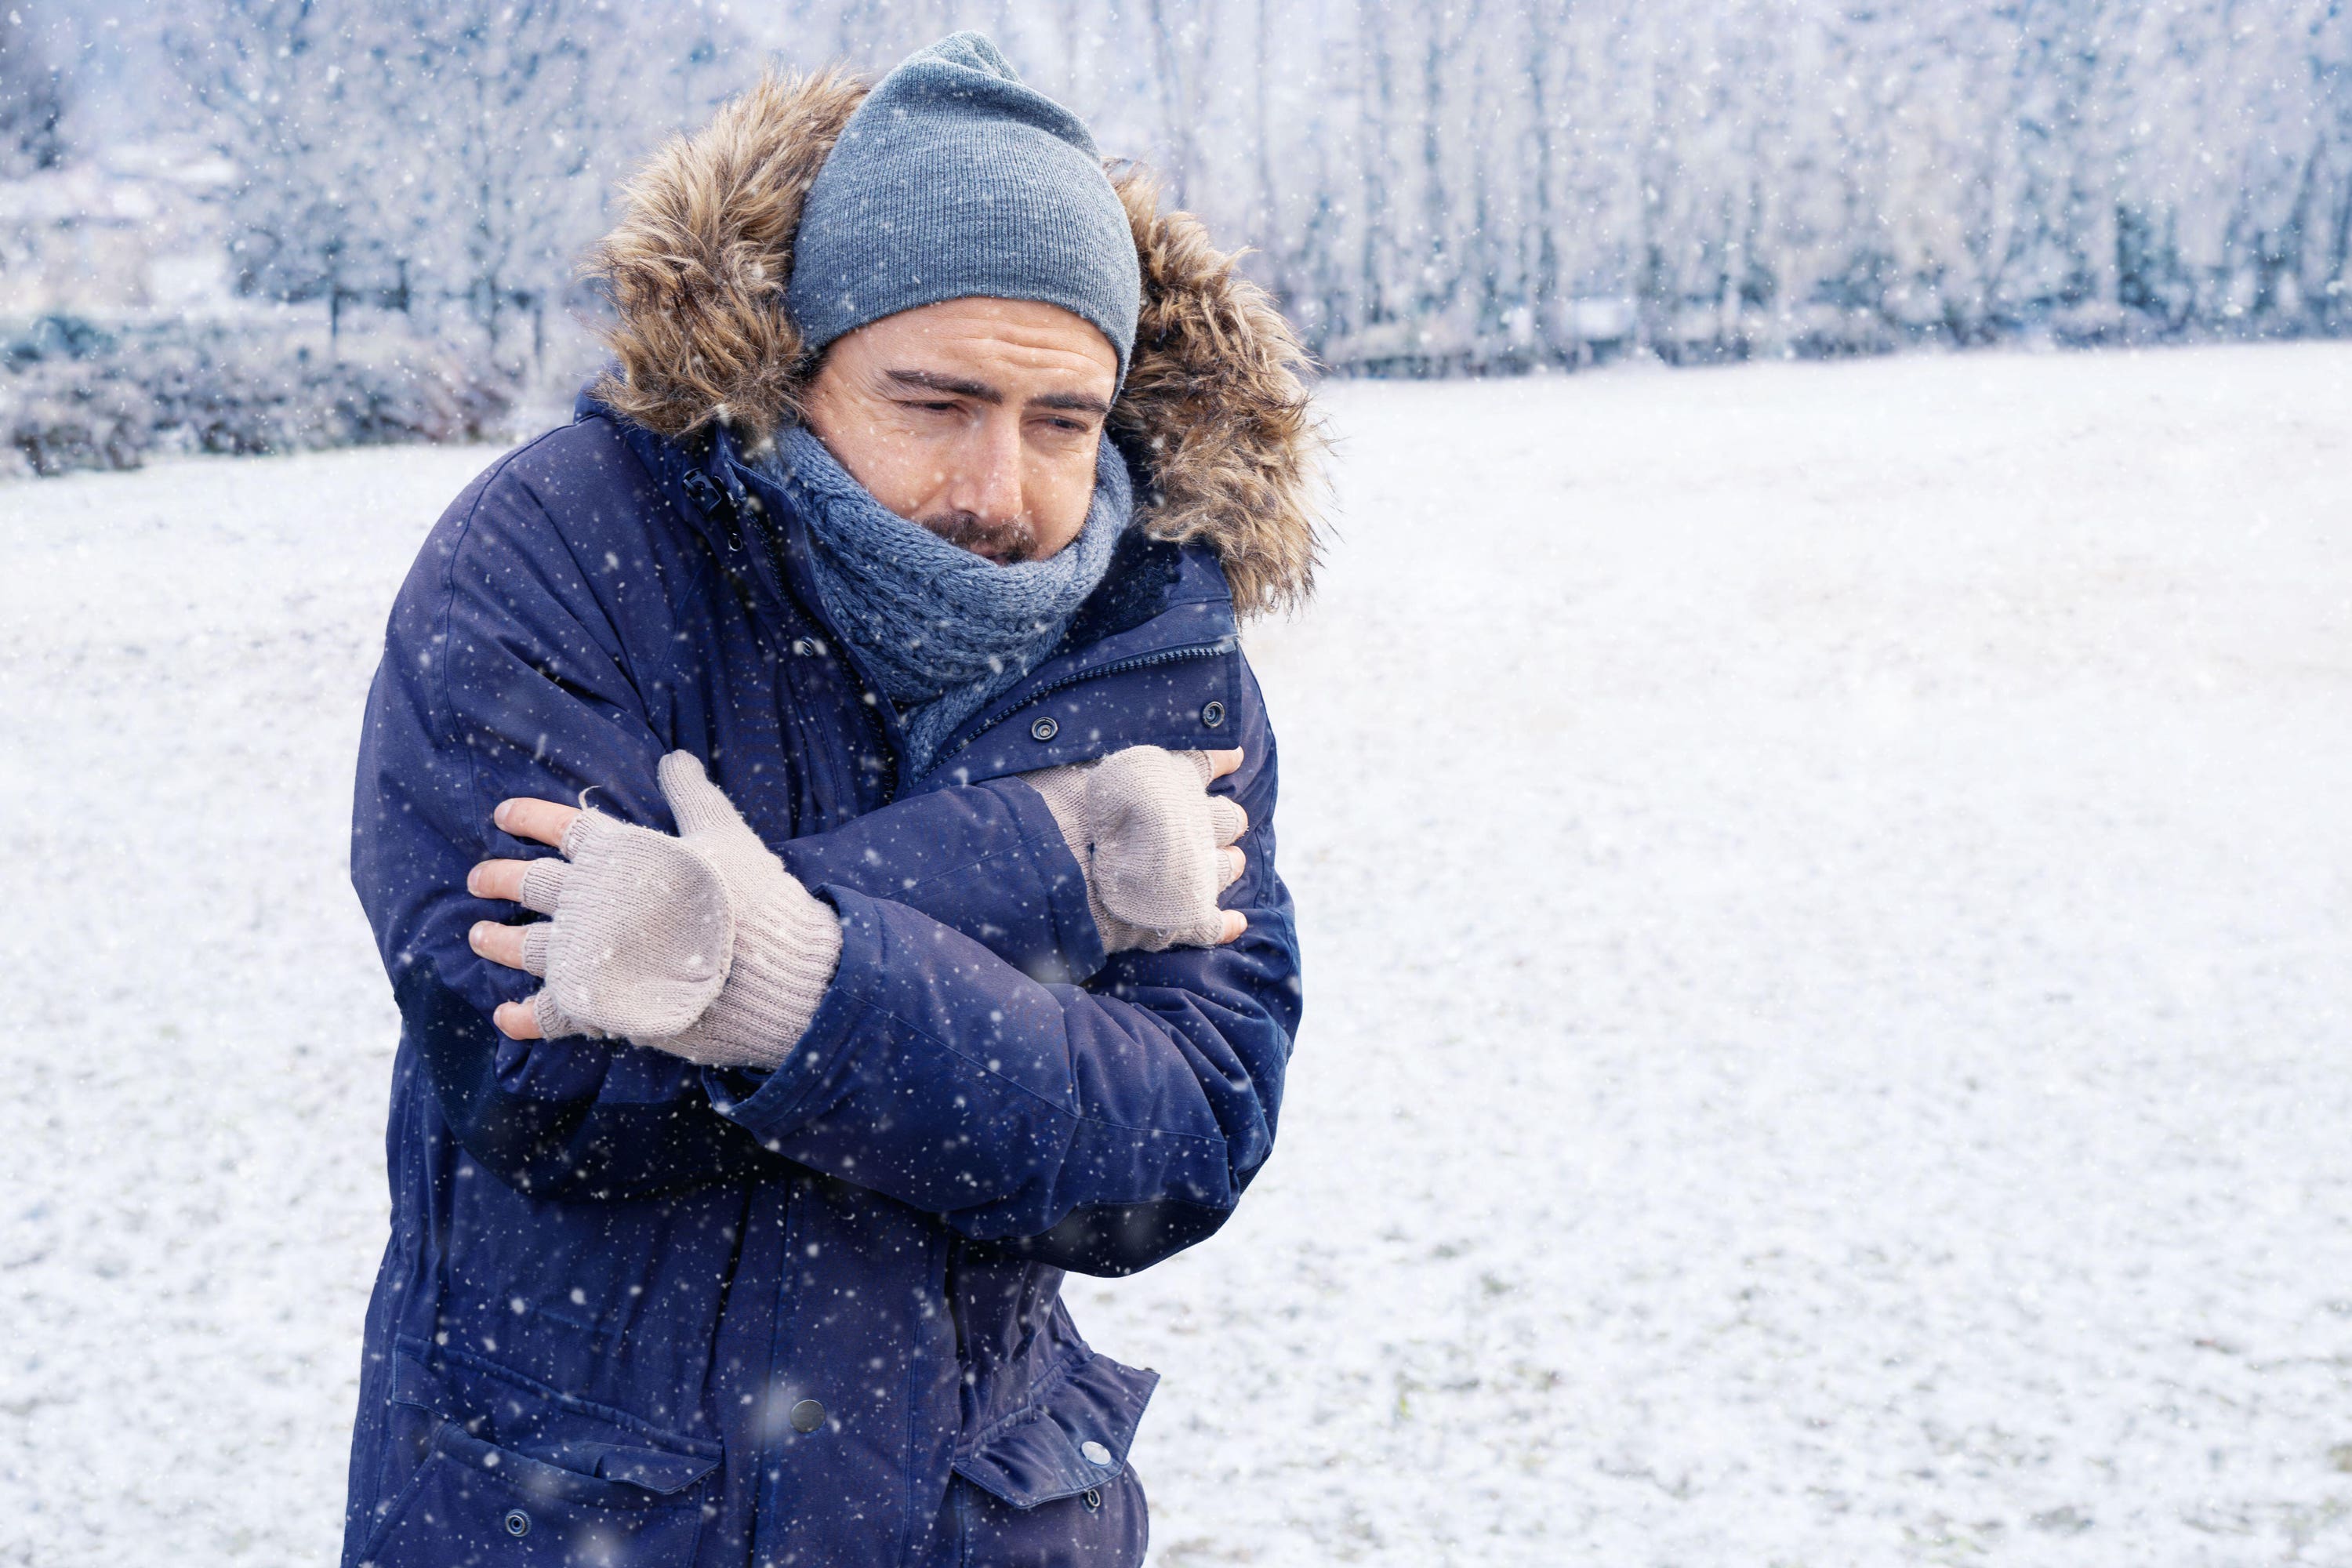 What is the cold snap actually doing to your body?